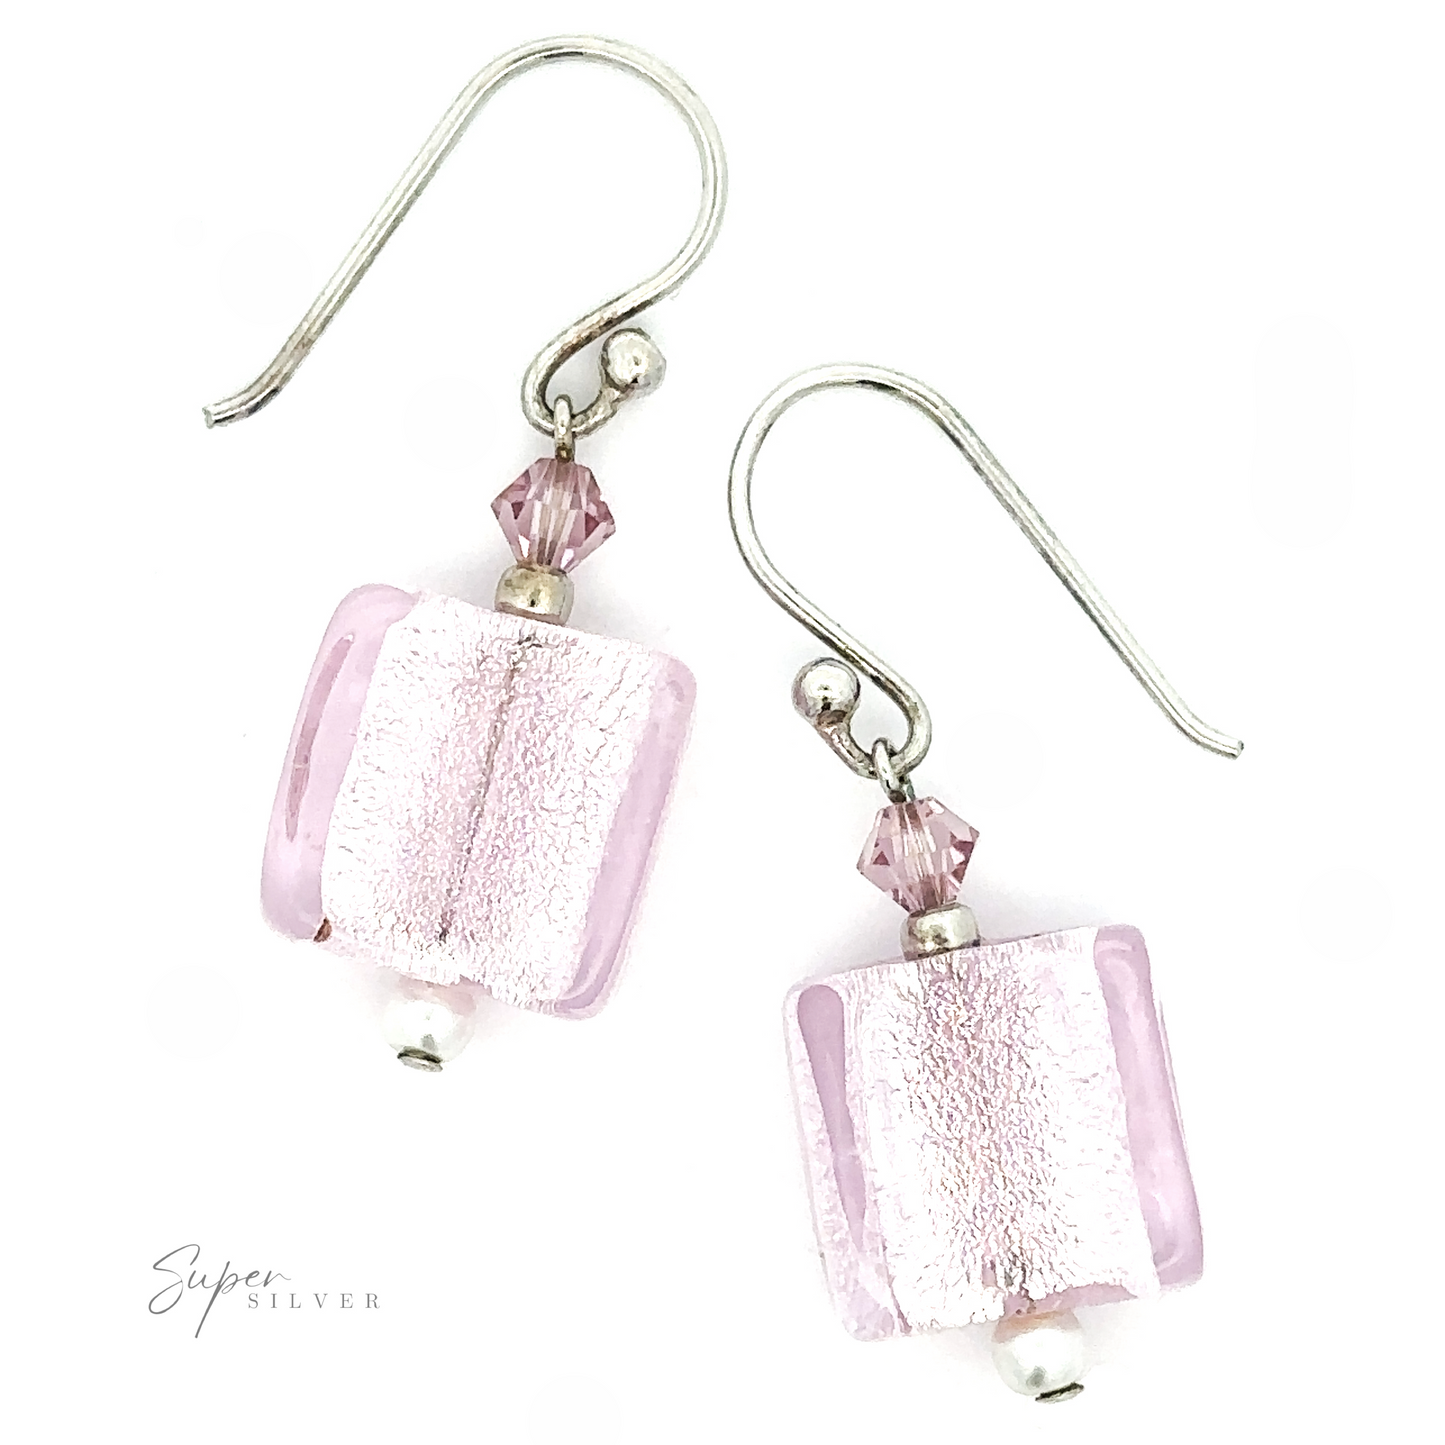 
                  
                    A pair of Beaded Resin Earrings with Small Pearls featuring square pink beads and smaller round pink beads, all crafted in .925 Sterling Silver, with a fishhook backing. The text "Super Silver" is at the bottom left.
                  
                